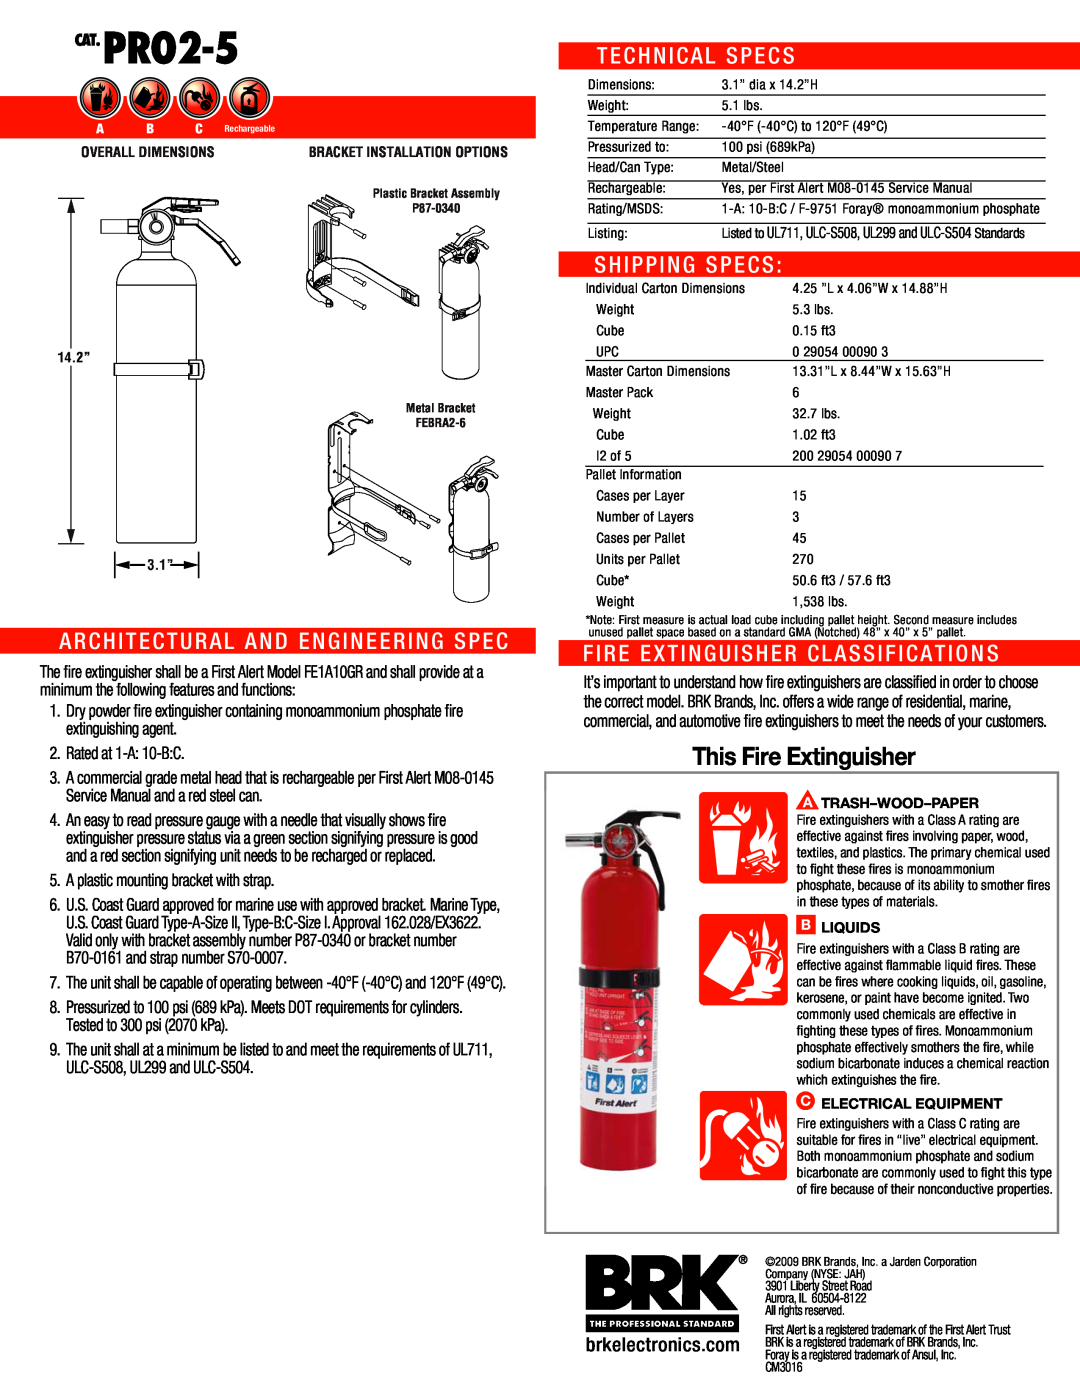 First Alert PR02-5 Architectural And Engineering Spec, Technical Specs, Shipping Specs, Fire Extinguisher Classifications 